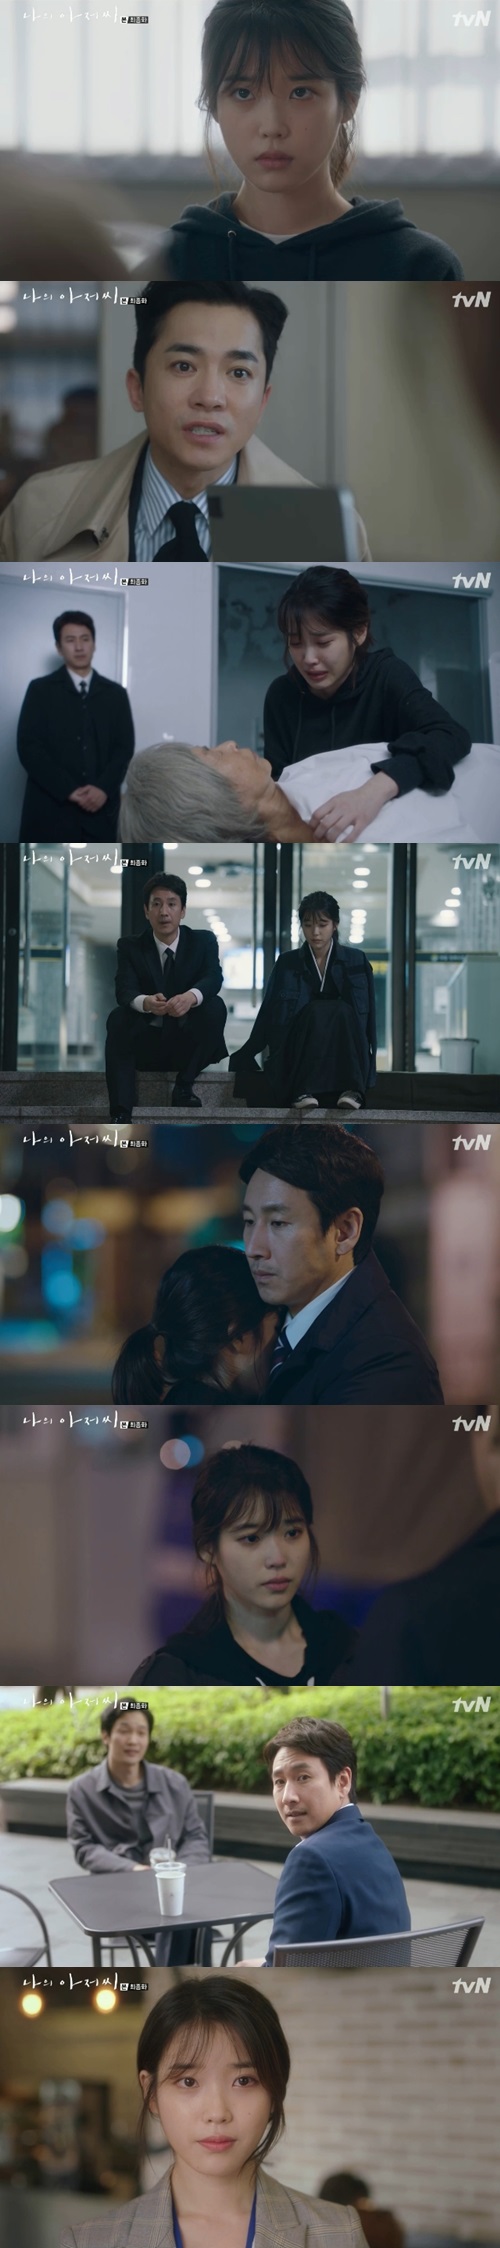 Lee Sun Gyun and IU were each greeted by happy endings, reuniting in a chance as they reached comfort.Park Dong-hoon (Lee Sun Gyun) and Lee Ji-an (IU) reached their comfort in the 16th episode of TVNs tree drama My Uncle, which aired on May 17 (the last episode/playplayplay by Park Hae-young/director Kim Won-seok).Park Dong-hoon took Ijian to a nursing home in his grandmother Lee Bong-ae (Son Sook-soo), and then went straight to the police station.Ijian decided to embroidery, and Park Dong-hoon wife Kang Yoon-hee (Ijia) decided to help. Kang Yoon-hee said, Im sorry, thank you. Ijian said, Why do you thank me?I hated her, I envied her.The virtue (Park Hae-jun) came to the old lover Elf Princess Rane (OEurope), and Park Dong-hoon, who discovered the virtue before Elf Princess Rane, bought a bouquet of flowers.Hodge presented Elf Princess Rane with a bouquet of flowers and said, I have not been able to come because I have been caught. Elf Princess Rane said, I do not get caught anymore.I am now what I am living with. He said, I live happily and well. Then, the cross-examination between Do Joon-young (Kim Young-min) and Lee Ji-an began.When the wiretap file disappeared, Do Jun-young insisted that Ijian did it at will and laughed, You did it because you liked Park Dong-hoon. Ijian said, Why do you like it?I dont like what people like, said Do Joon-young, who was furious, saying, I will be charged with all charges, including defamation of intimidation and intimidation.Do Joon-young waited for the contact of Jong-su (Hong-in), who had previously asked him for 100 million won for the eavesdropping file, but Lee Kwang-il (Jang Ki-yong) took the eavesdropping file separately.Lee Ji-an called Park Dong-hoon, and Park Dong-hoon (Park Ho-san) Park Ki-hoon (Song Dawn) Elf Princess Rane ran.Park Dong-hoon was attracted to the poor poor place and mobilized the money and early soccer clubs he had collected.Do Joon-young started looking for a separate eavesdropping file, and Lee Kwang-il was in a position to be chased.Lee Kwang-il sent all the eavesdropping files to Park Dong-hoon with Quick, and the sins of Do Jun-young were revealed, and the affair between Do Jun-young and Park Dong-hoon wife Kang Yoon-hee spread.I also informed him that Ijian helped Park Dong-hoon. Chang (Shin Gu-min) introduced Lee Ji-an to Busan.Ijian said he wanted to live a new life with Park Dong-hoon and no one knew, and Park Dong-hoon said, You came to this neighborhood to save me.Youre the one who saved me from dying. Ijian responded, Ive lived with you for the first time. Park Dong-hoon blessed him, Lets be really happy now.Ijian asked, Can I hold it? Park Dong-hoon hugged Ijian.Do Joon-young and Yoon Sang-moo (Jeong Jae-sung) left the company, and Park Dong-hoon (Jeong Hae-kyun) returned.After Lee Ji-an left, time passed and Kang Yoon-hee left the country with his son Park Ji-seok (Jung Ji-hoon) and plans to study more.Park Dong-hoon, who remained alone, did not contact Ijian, and shed tears suddenly while watching TV while eating.Park Dong-hoon reunited with his wife, and four seasons passed as Park Ki-hoon and Choi Yu-ra broke up.Choi persuaded Park to do the movie again, and Park said, You are ashamed of me cleaning up. You are the only one on the board.Choi became a top star in the street with billboards, and Park Ki-hoon started writing a new scenario with Choi Yoo-ras story.Yoo Gyeong-sang